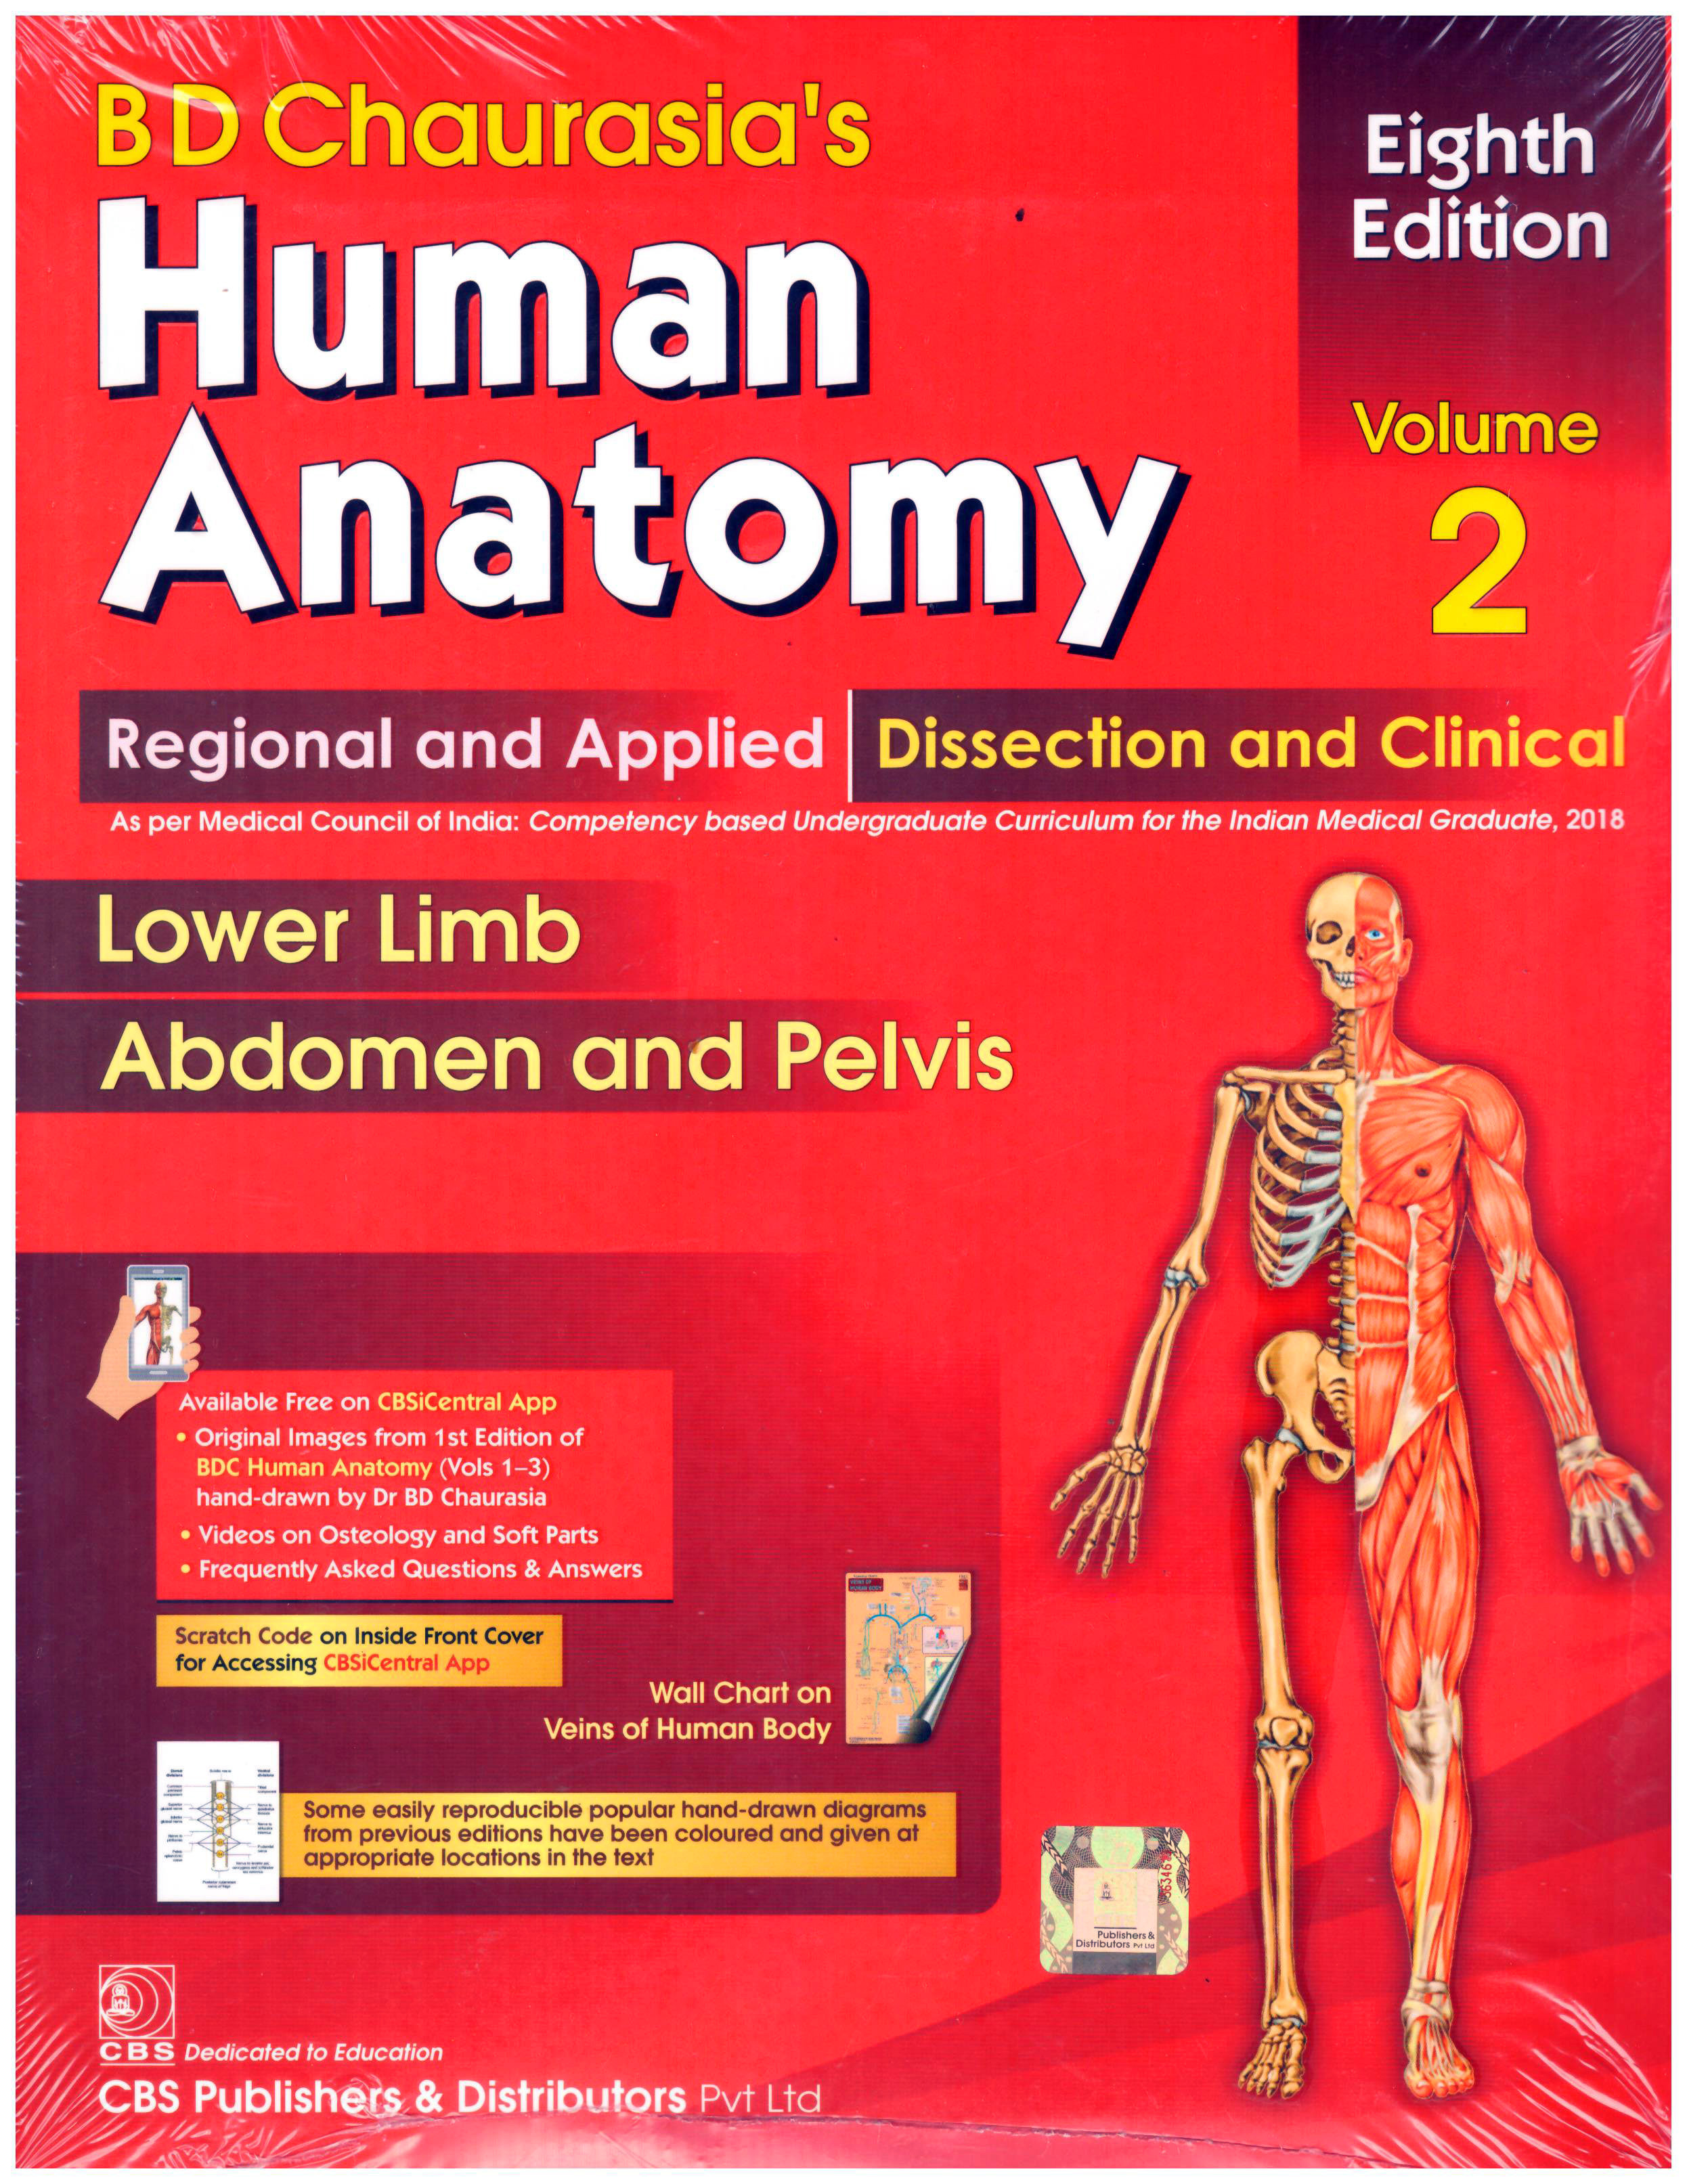 Human Anatomy Regional and Applied Dissection and clinical Lower Limb Abdomen and Pelvis Volume 2